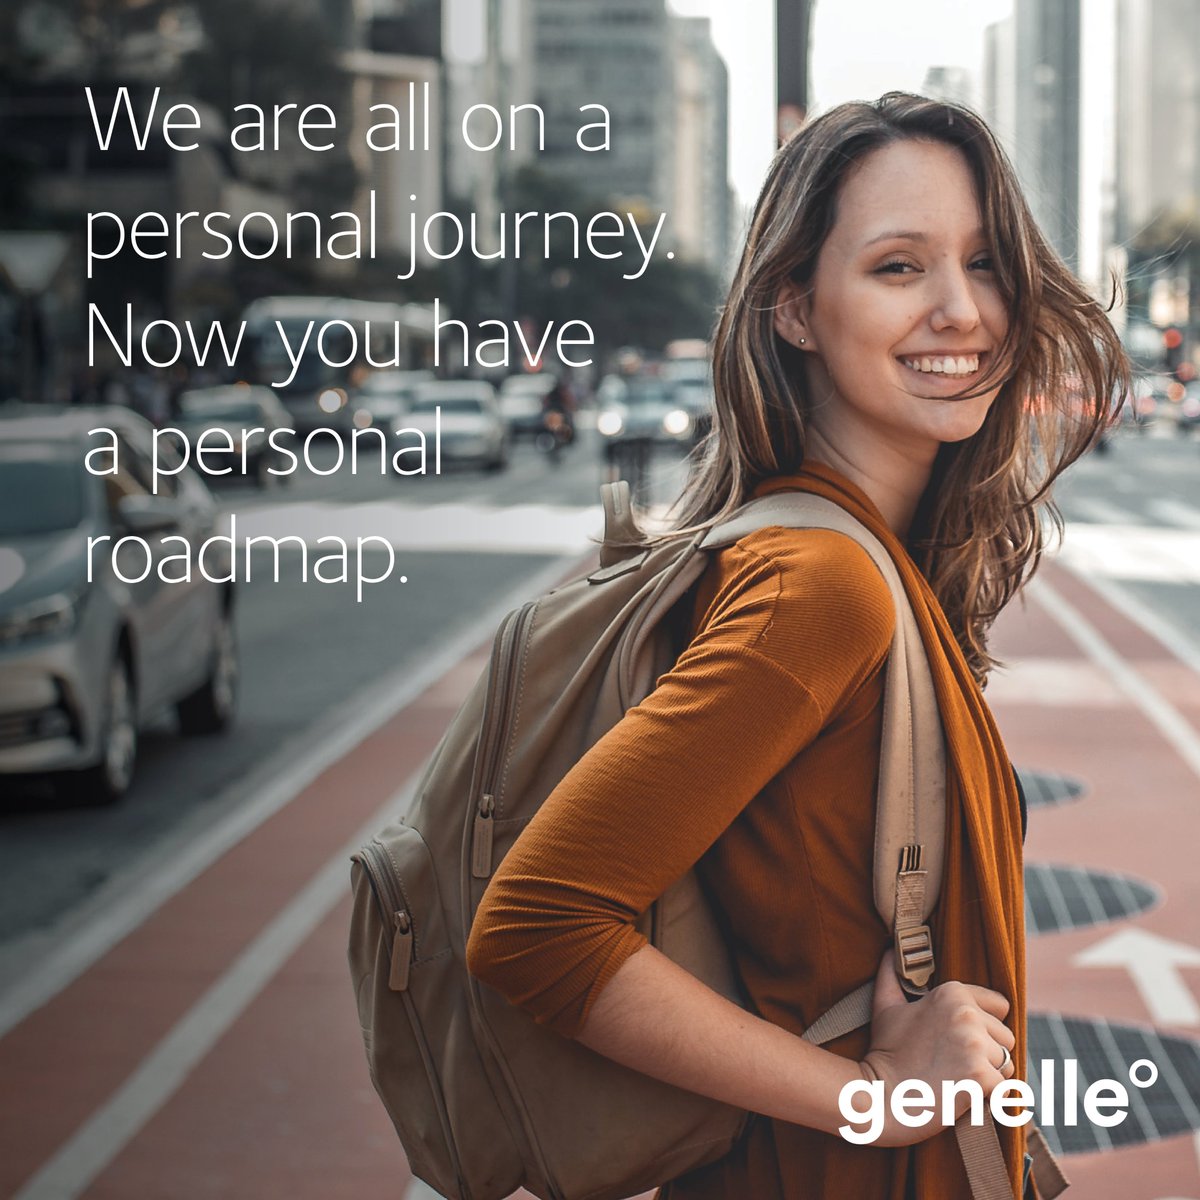 Genelle’s Genetic Roadmaps are a unique plan of how your DNA affects your health and abilities, forming the foundation of all Genelle’s products in a platform that constantly updates to reflect your health and achievements. #personaljourney #dnahealth